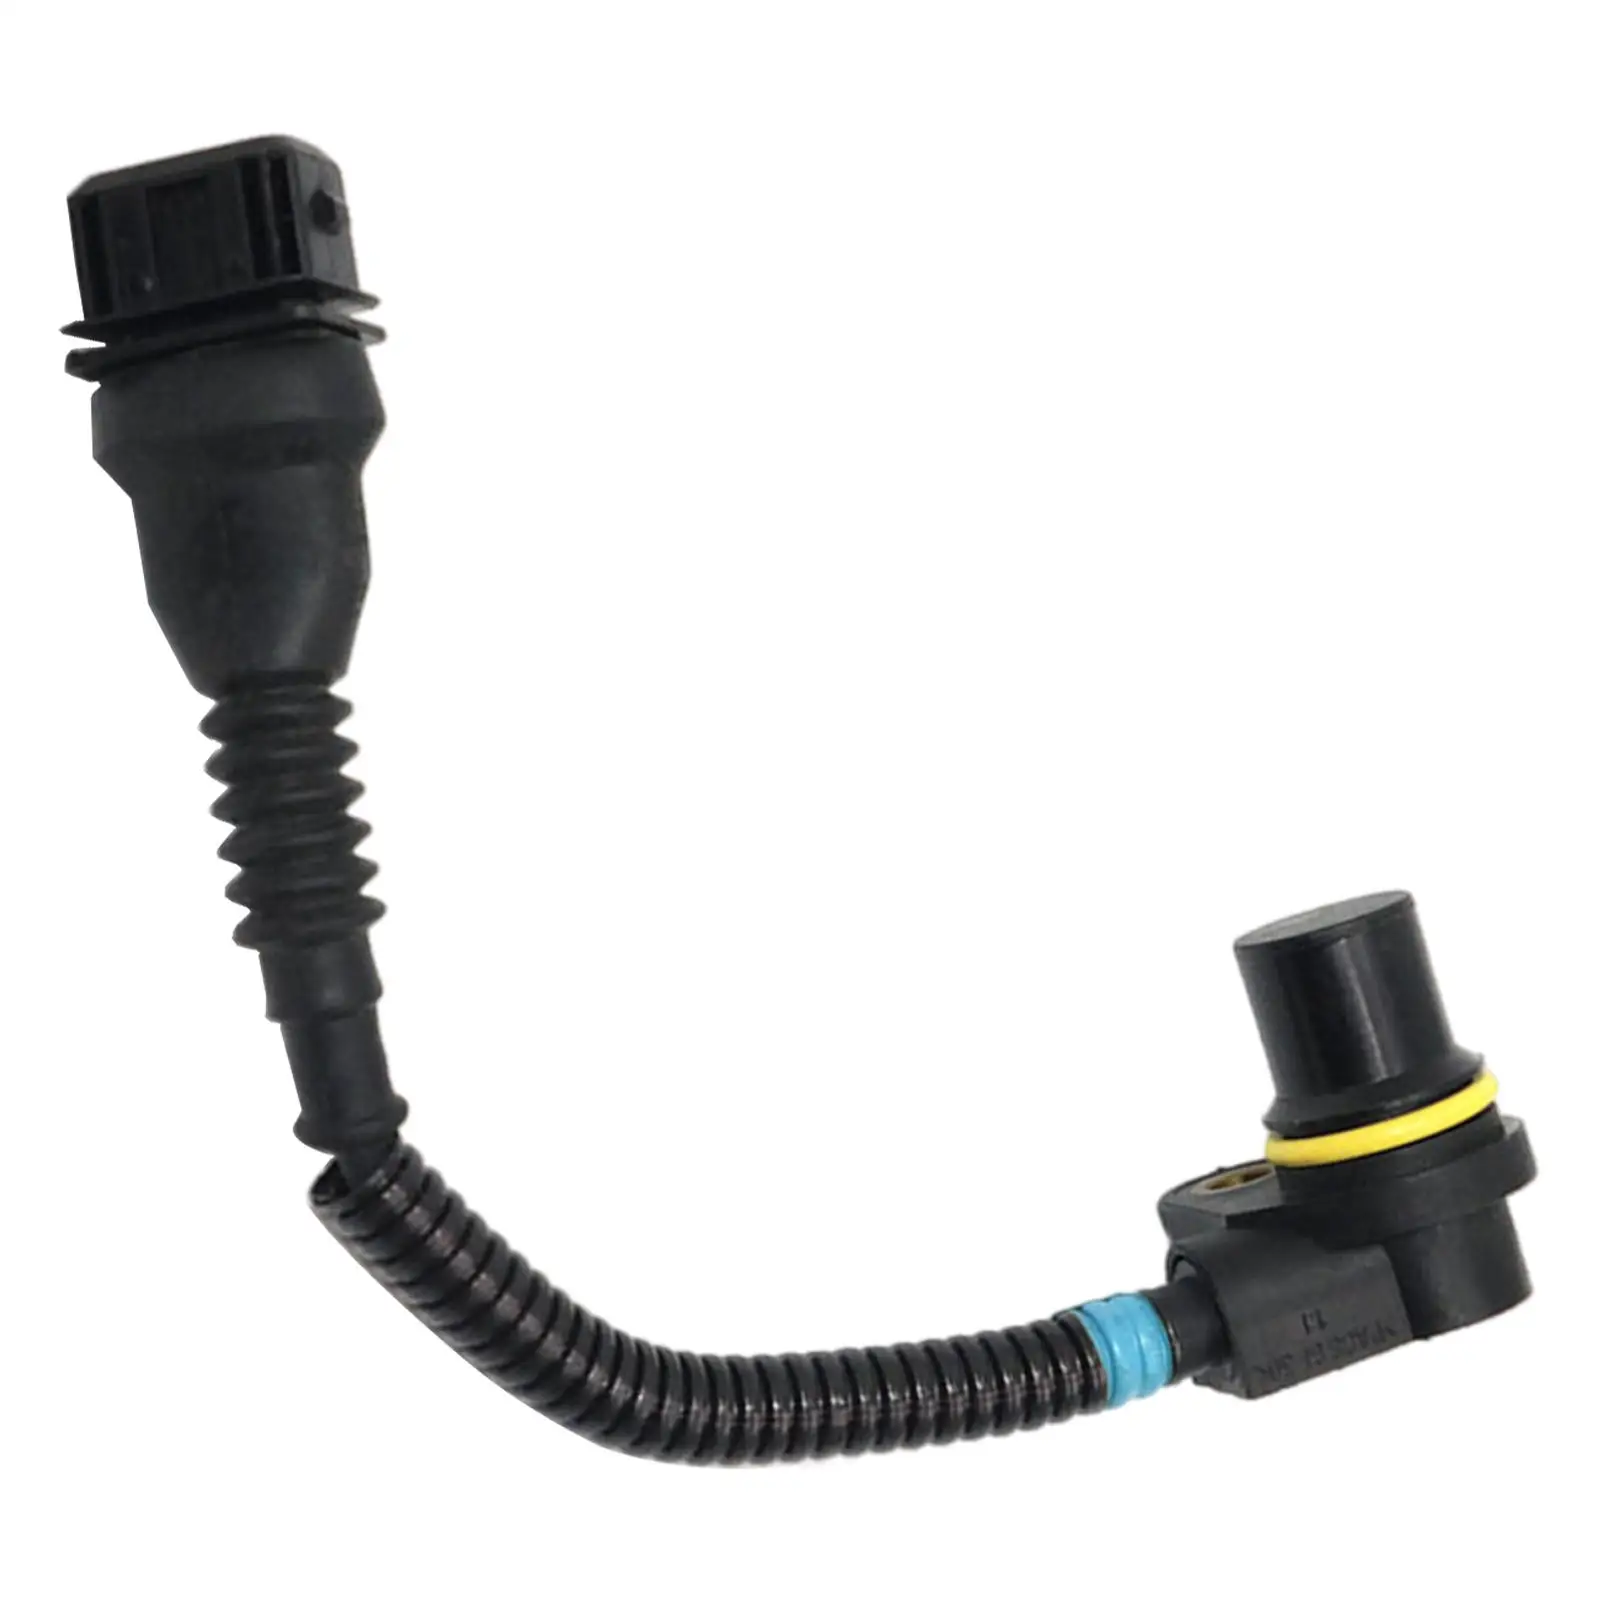 Automatic Transmission Rotational Speed Sensor Replacement 24357518732 for Mini Cooper R50 R52 2002-08 Vehicle Parts